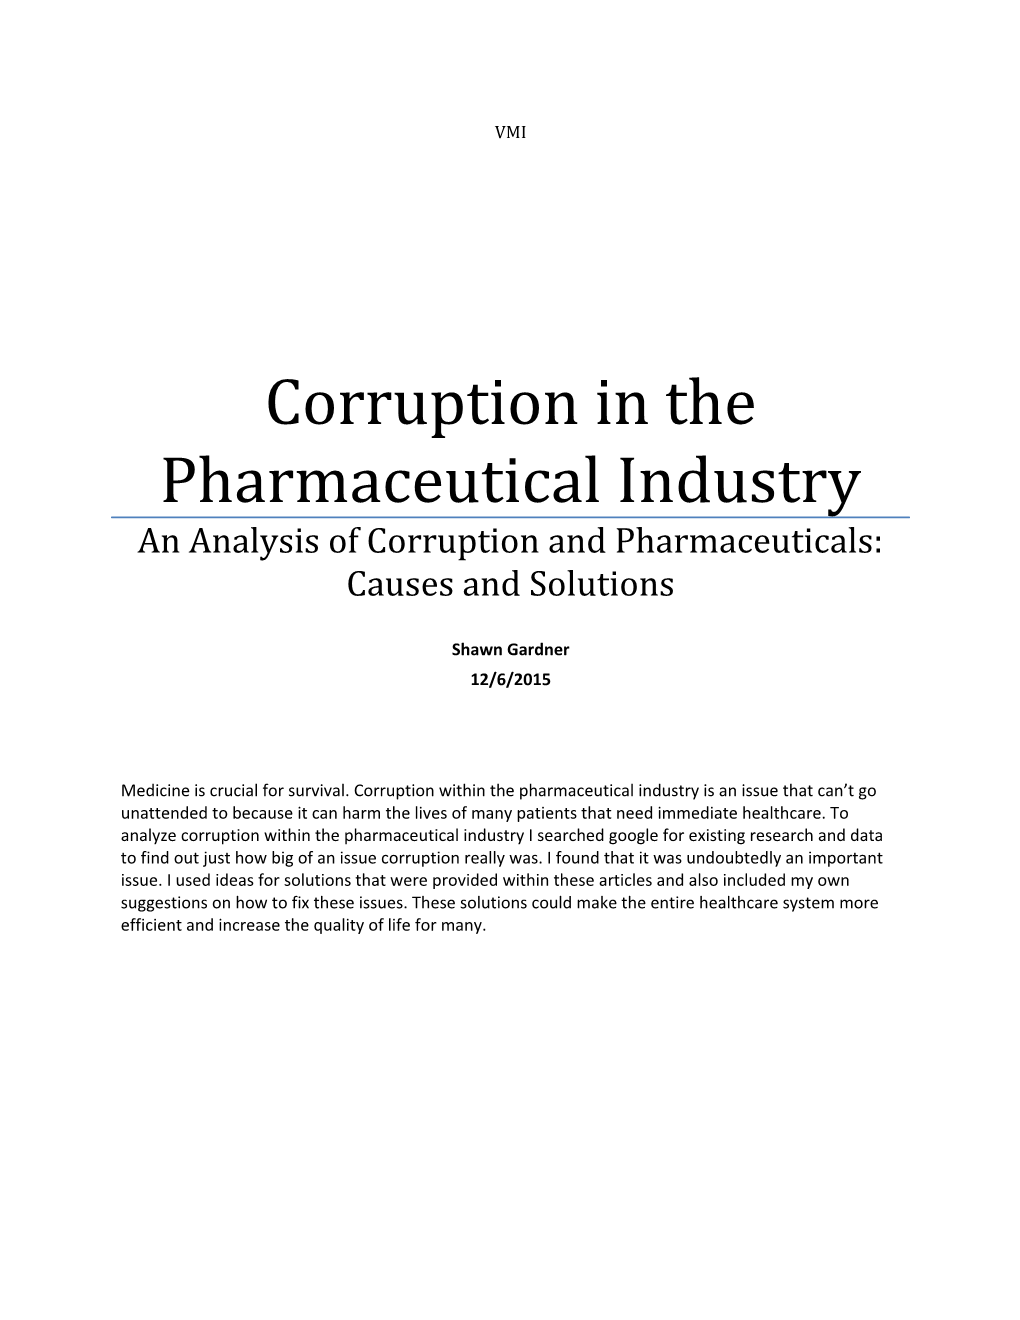 Corruption in the Pharmaceutical Industry